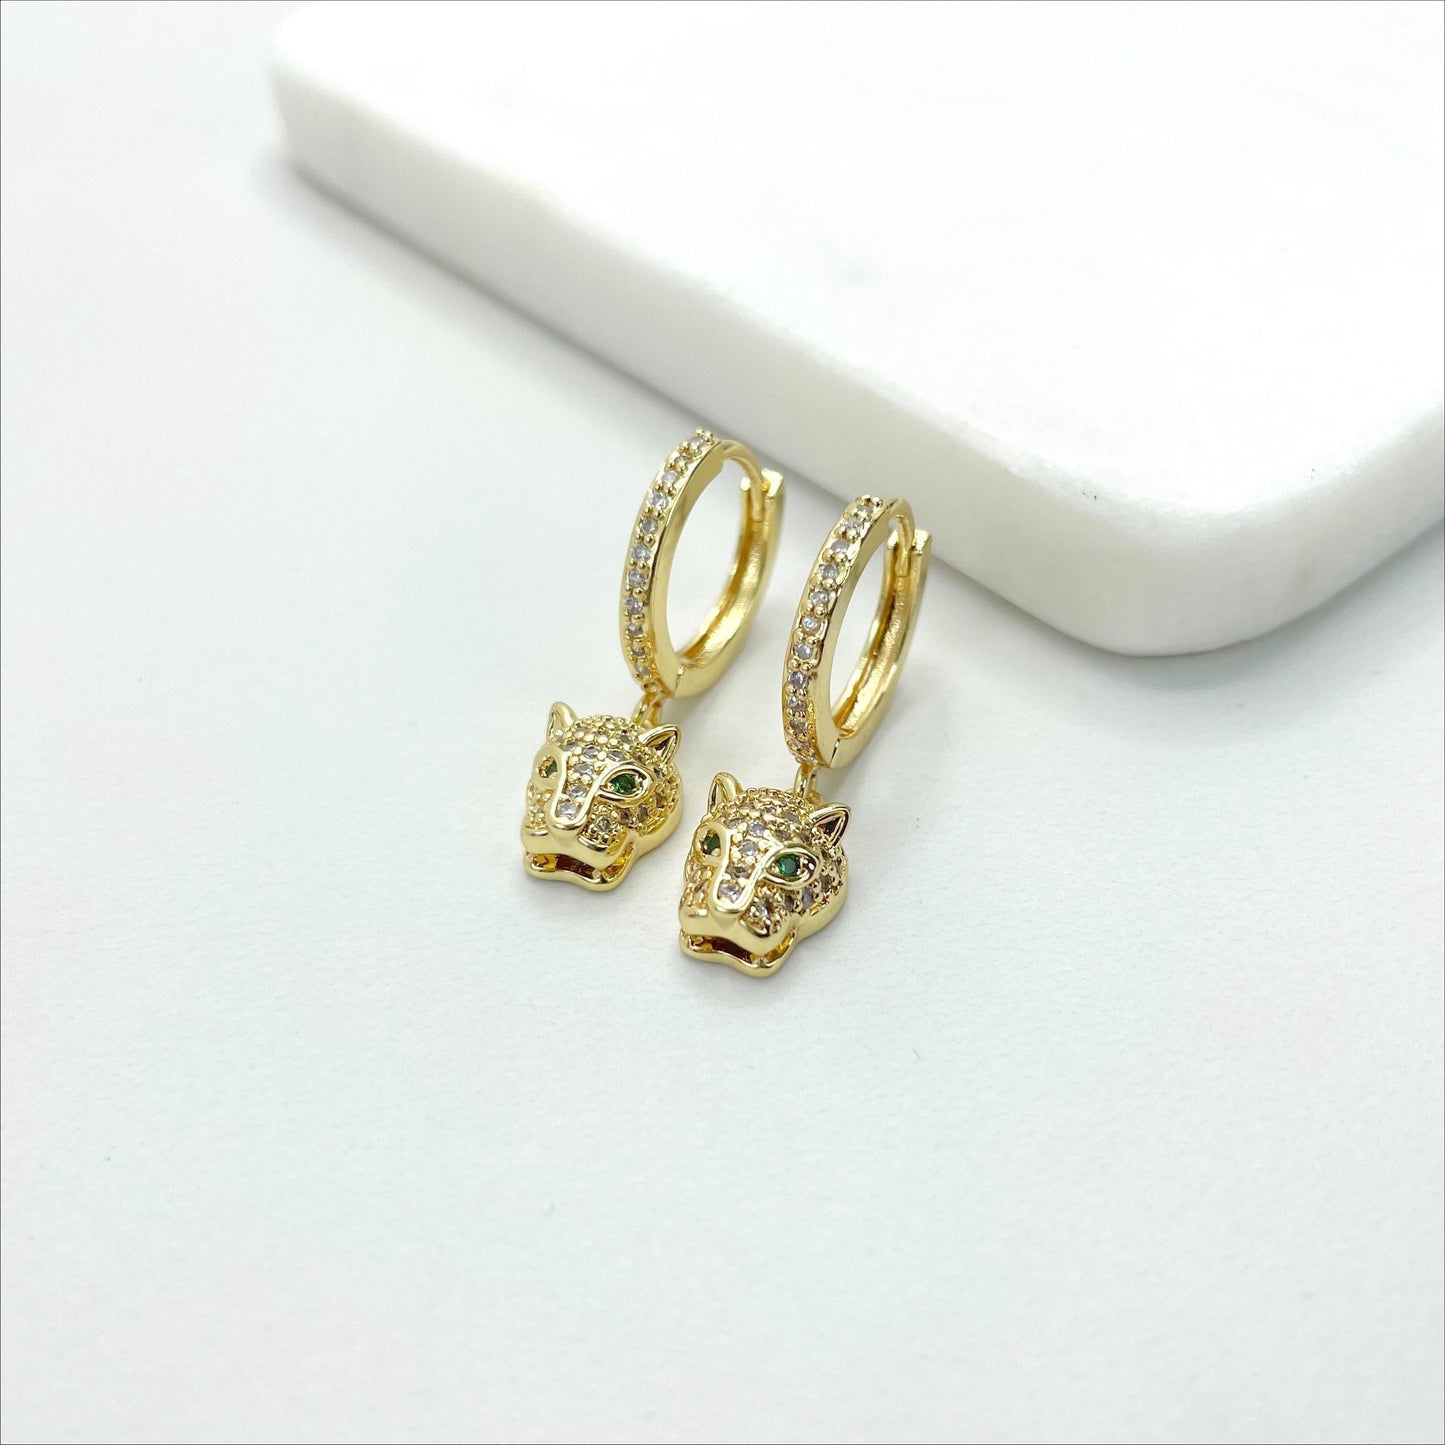 18k Gold Filled Micro Pave Cubic Zirconia Huggie Earrings with Panther Head Design Charms Wholesale Jewelry Making Supplies